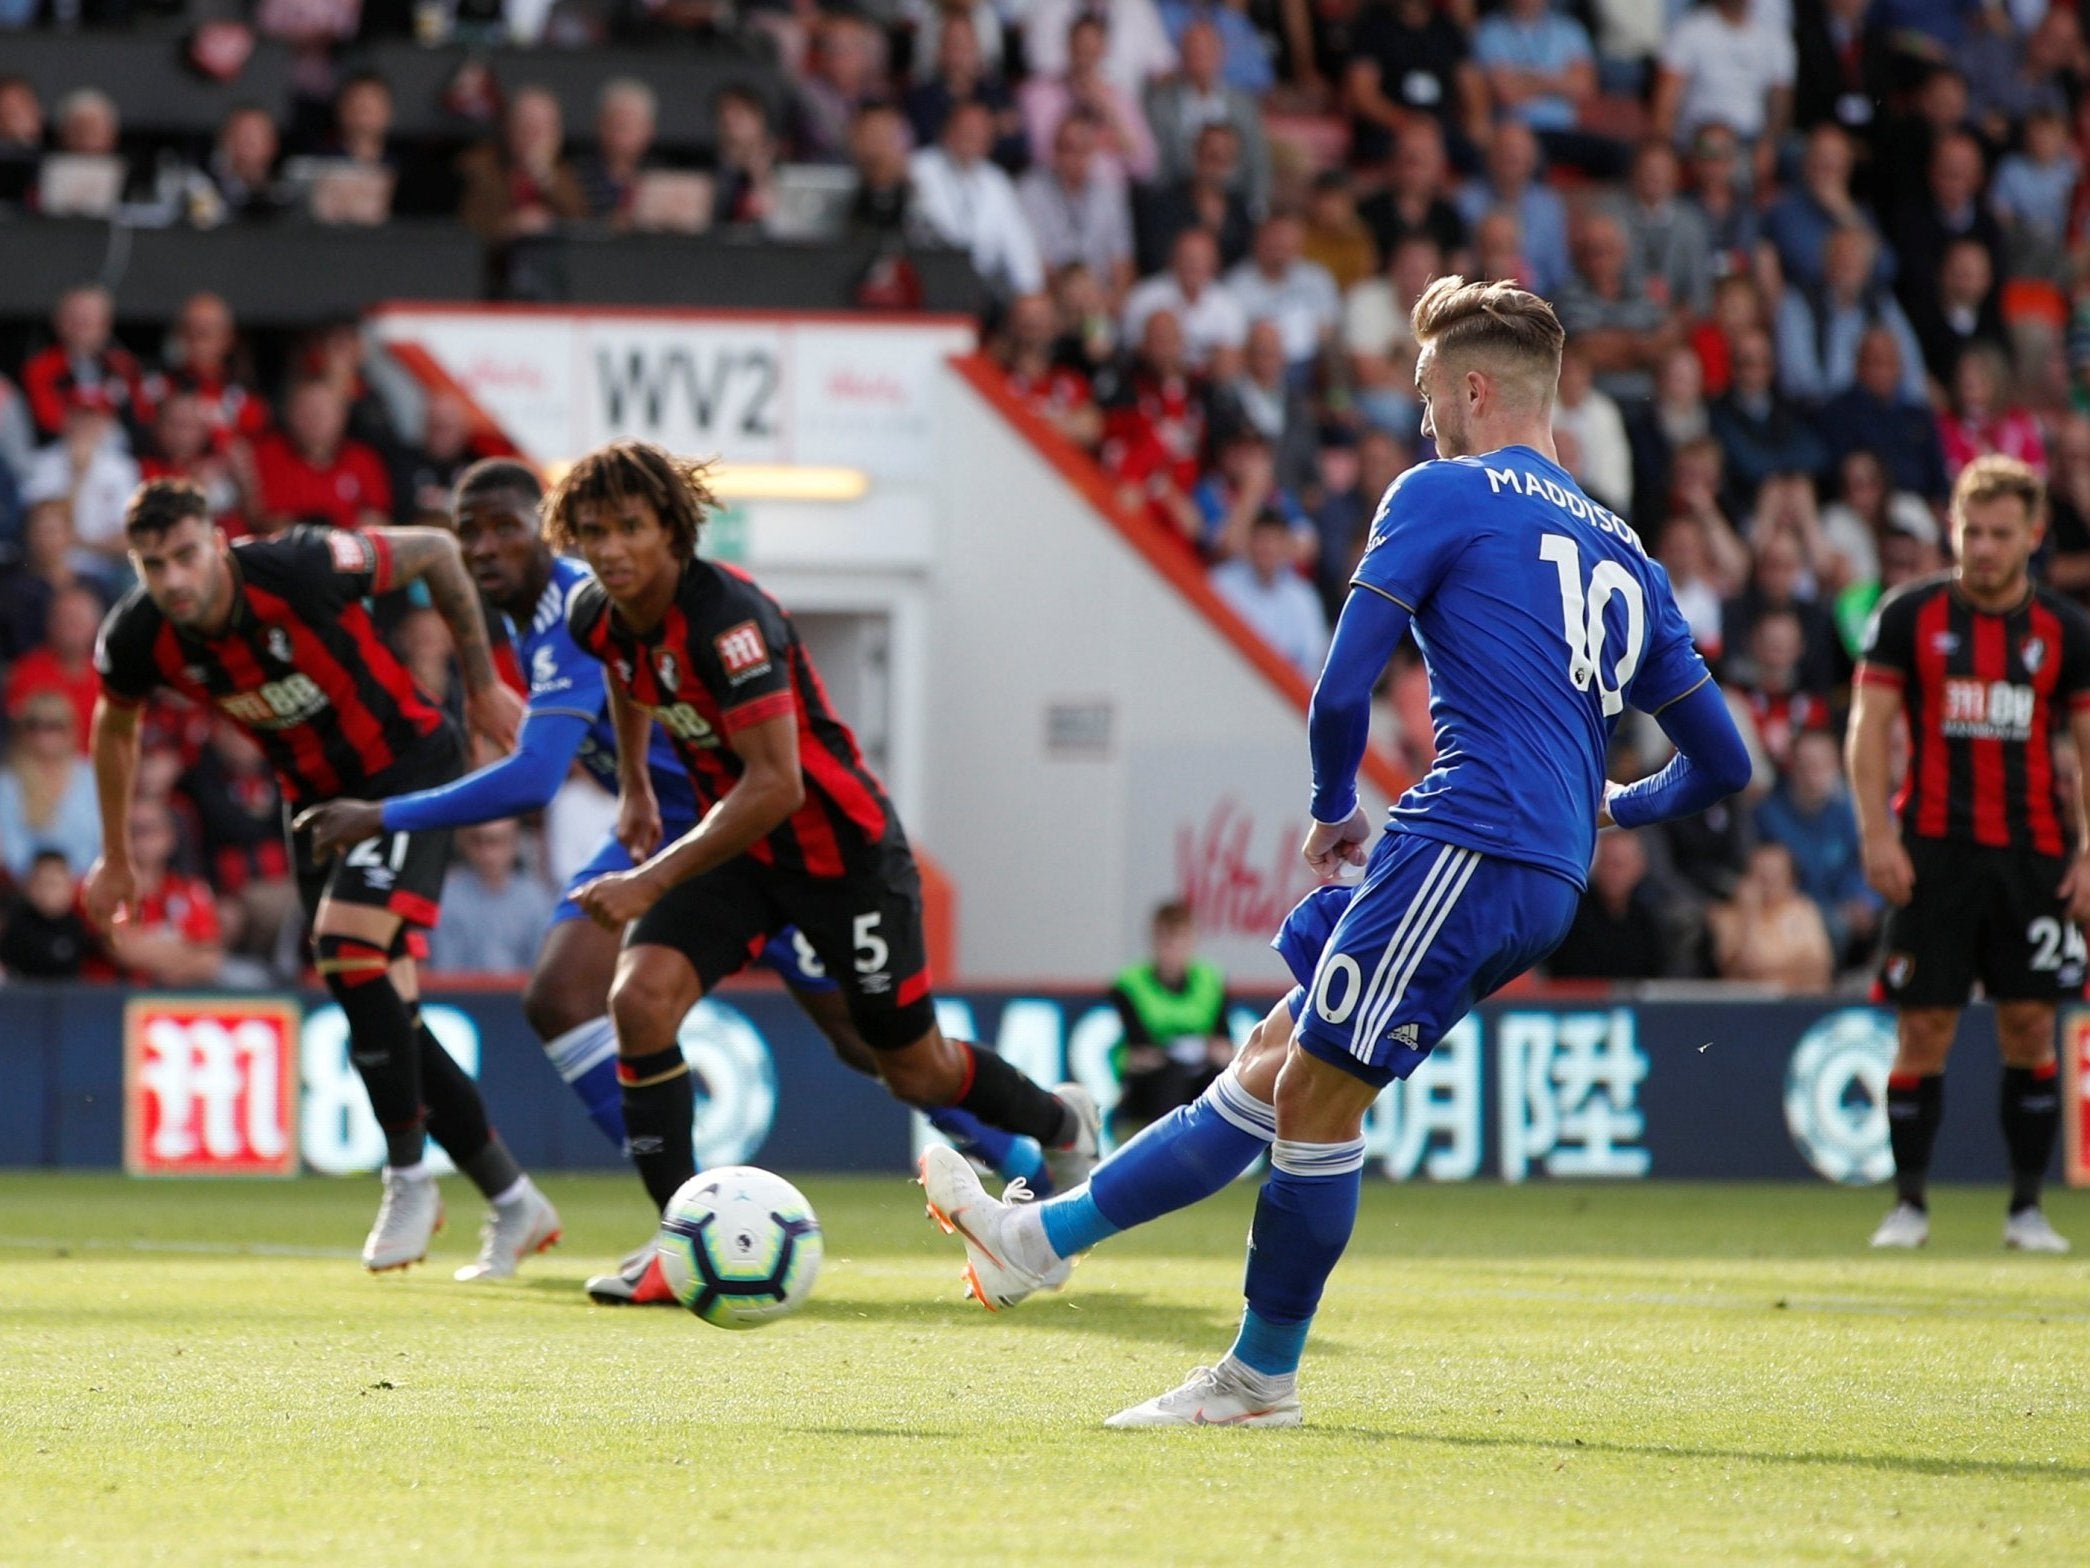 James Maddison tucks home a late penalty for Leicester